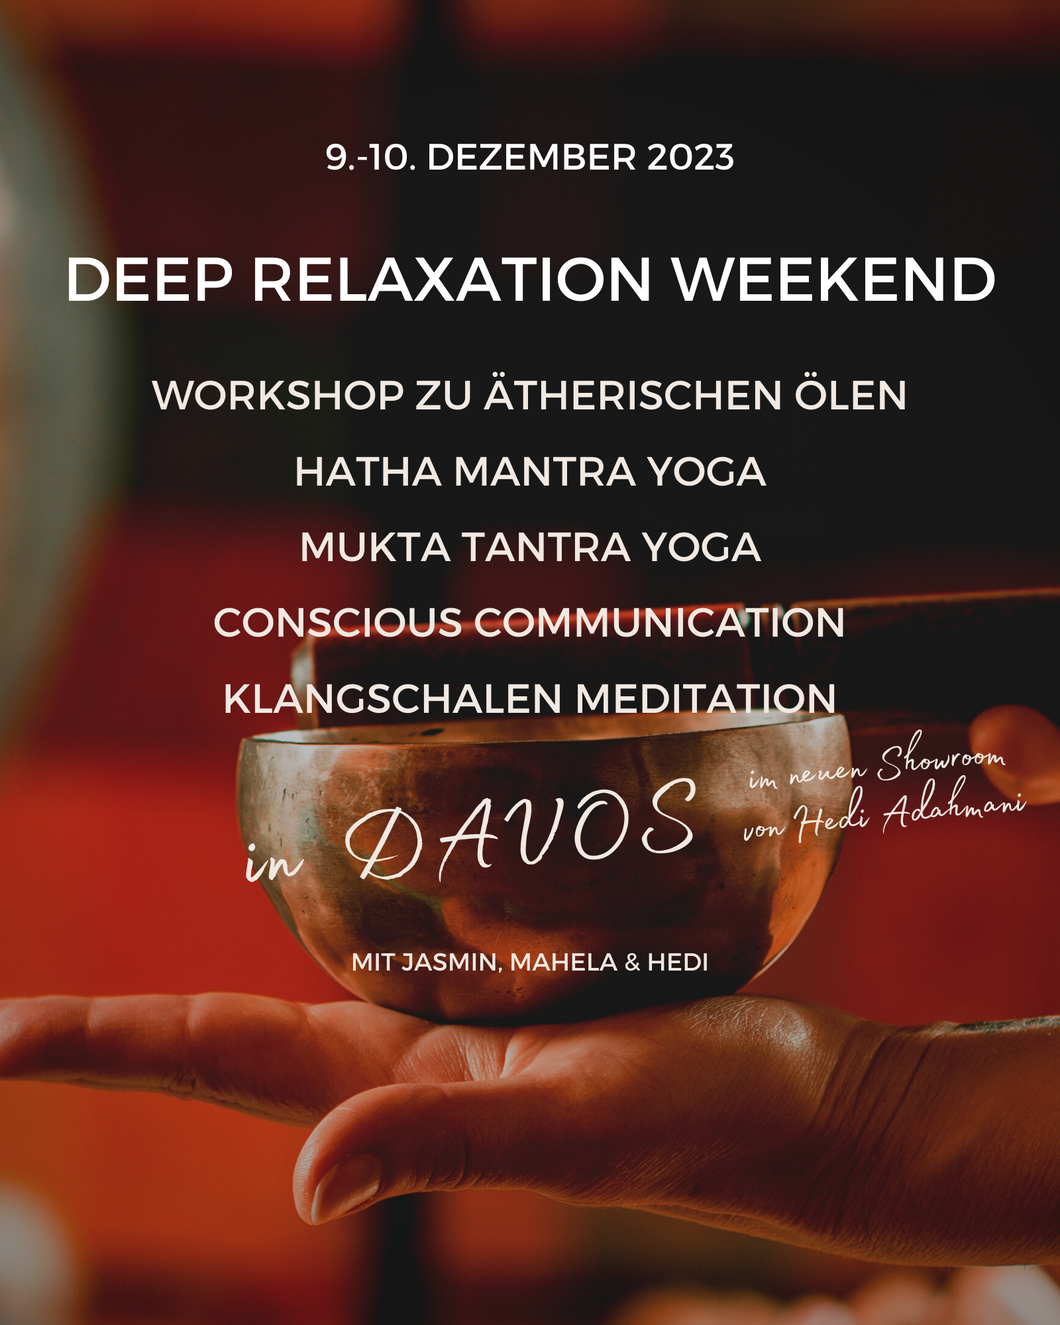 Deep Relaxation Weekend DAVOS